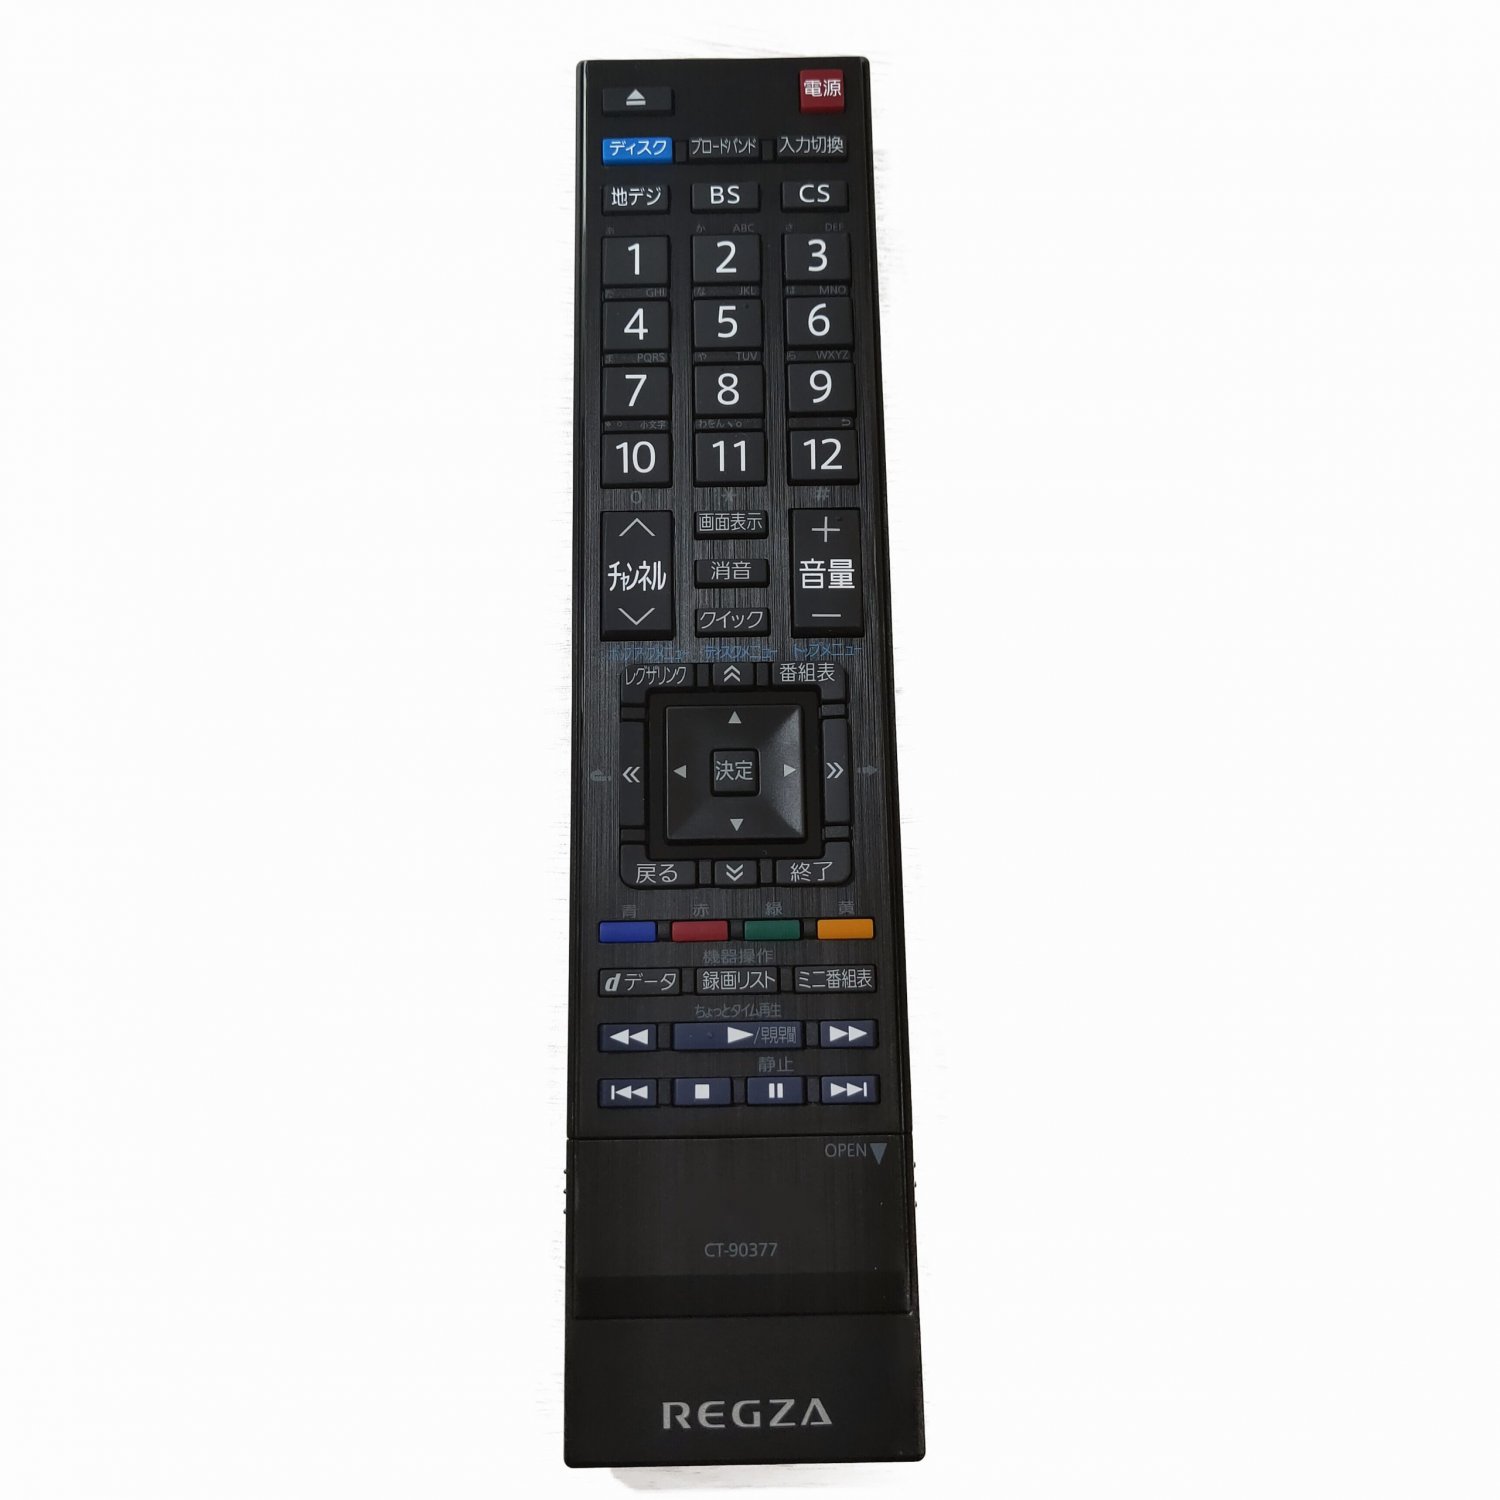 Original CT-90377 Remote Control For Toshiba LCD TV 40RB2 32RB2 26RB2 40HB2 3HB2